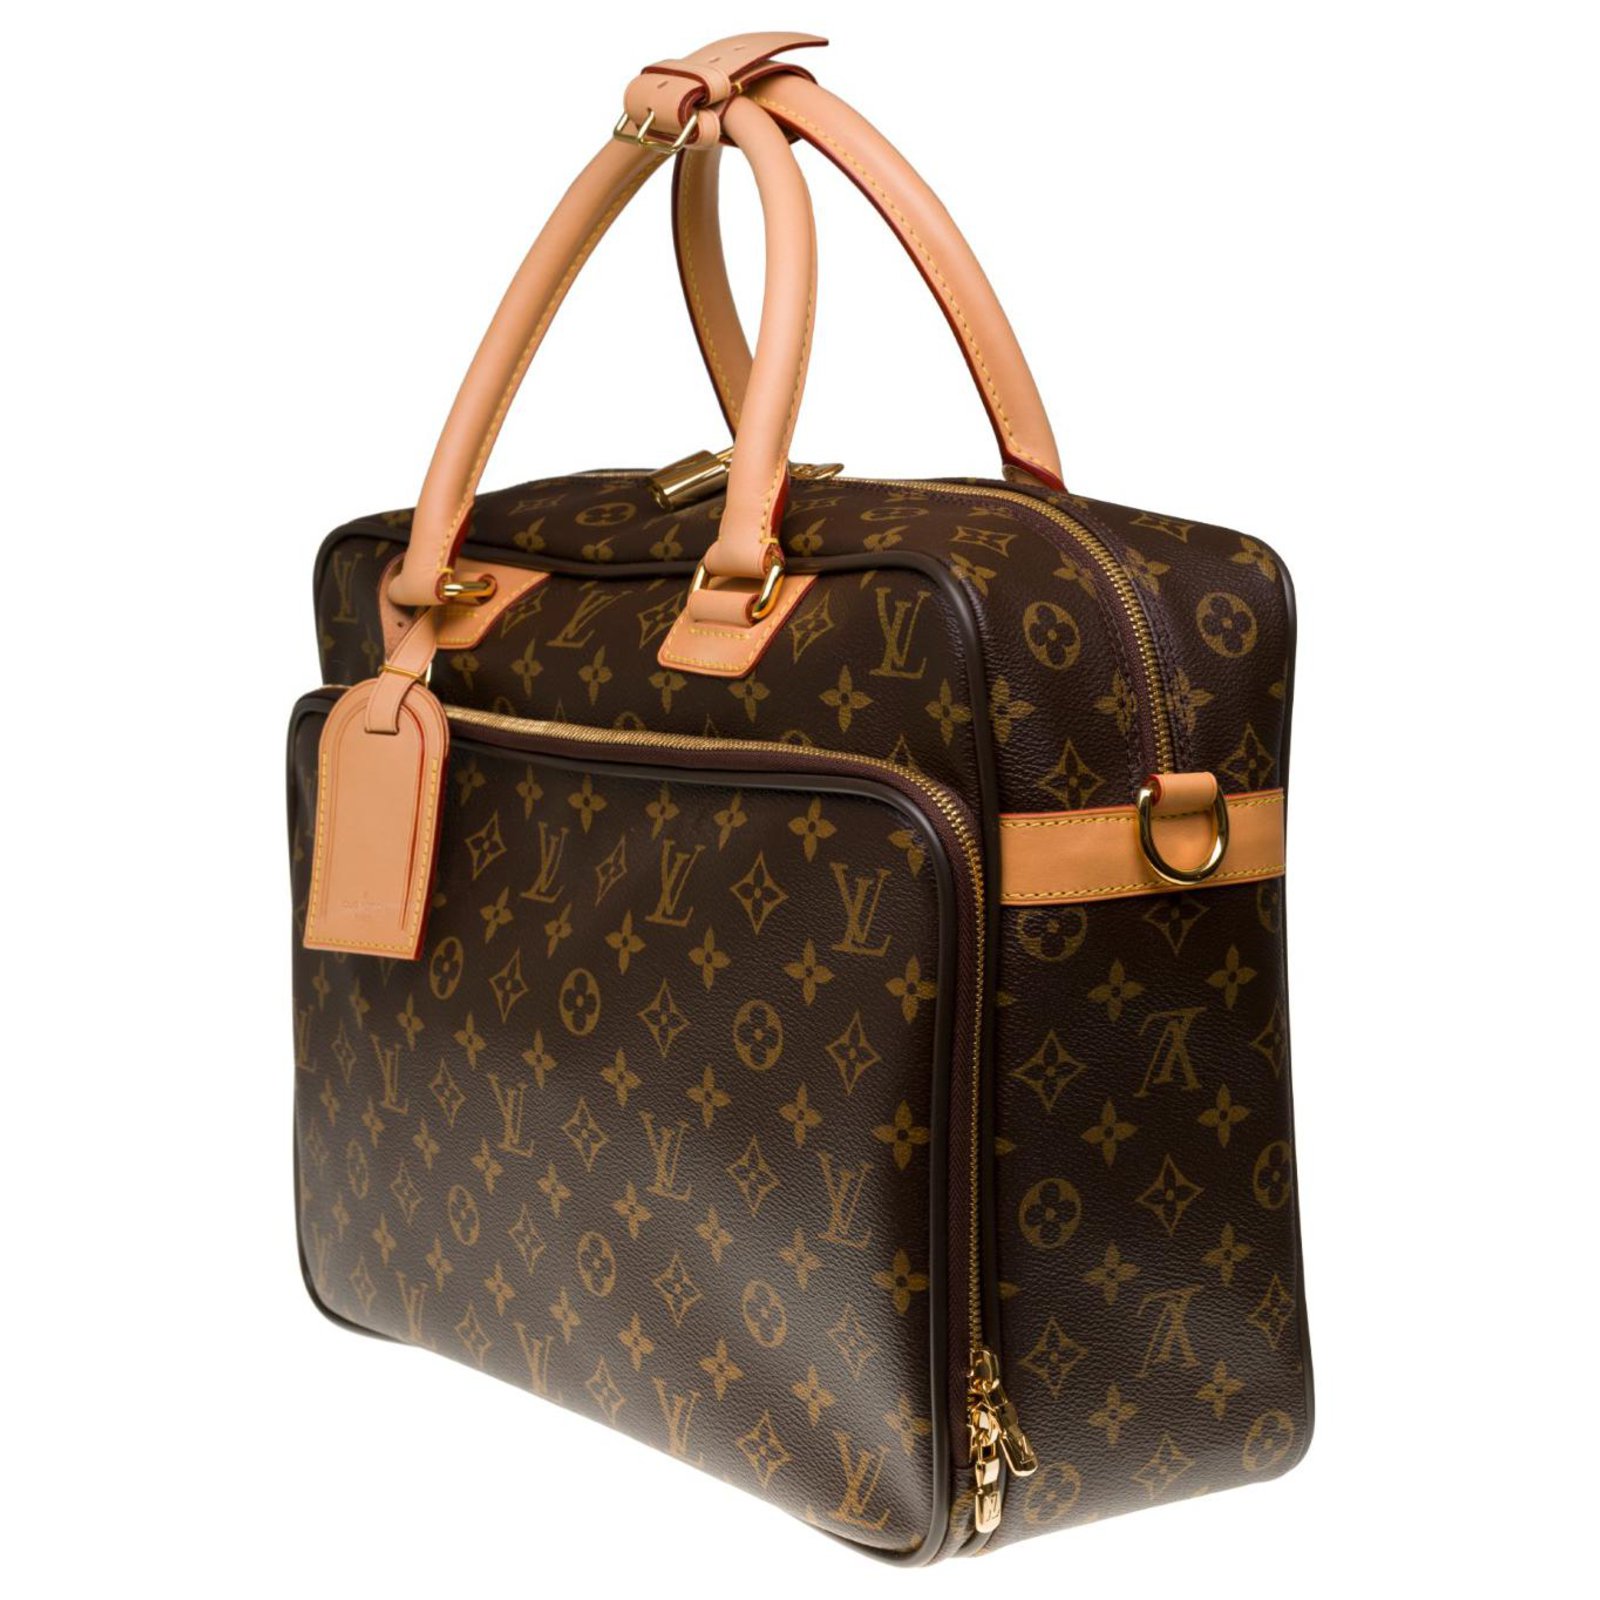 Louis Vuitton Alize travel bag in monogram canvas and natural